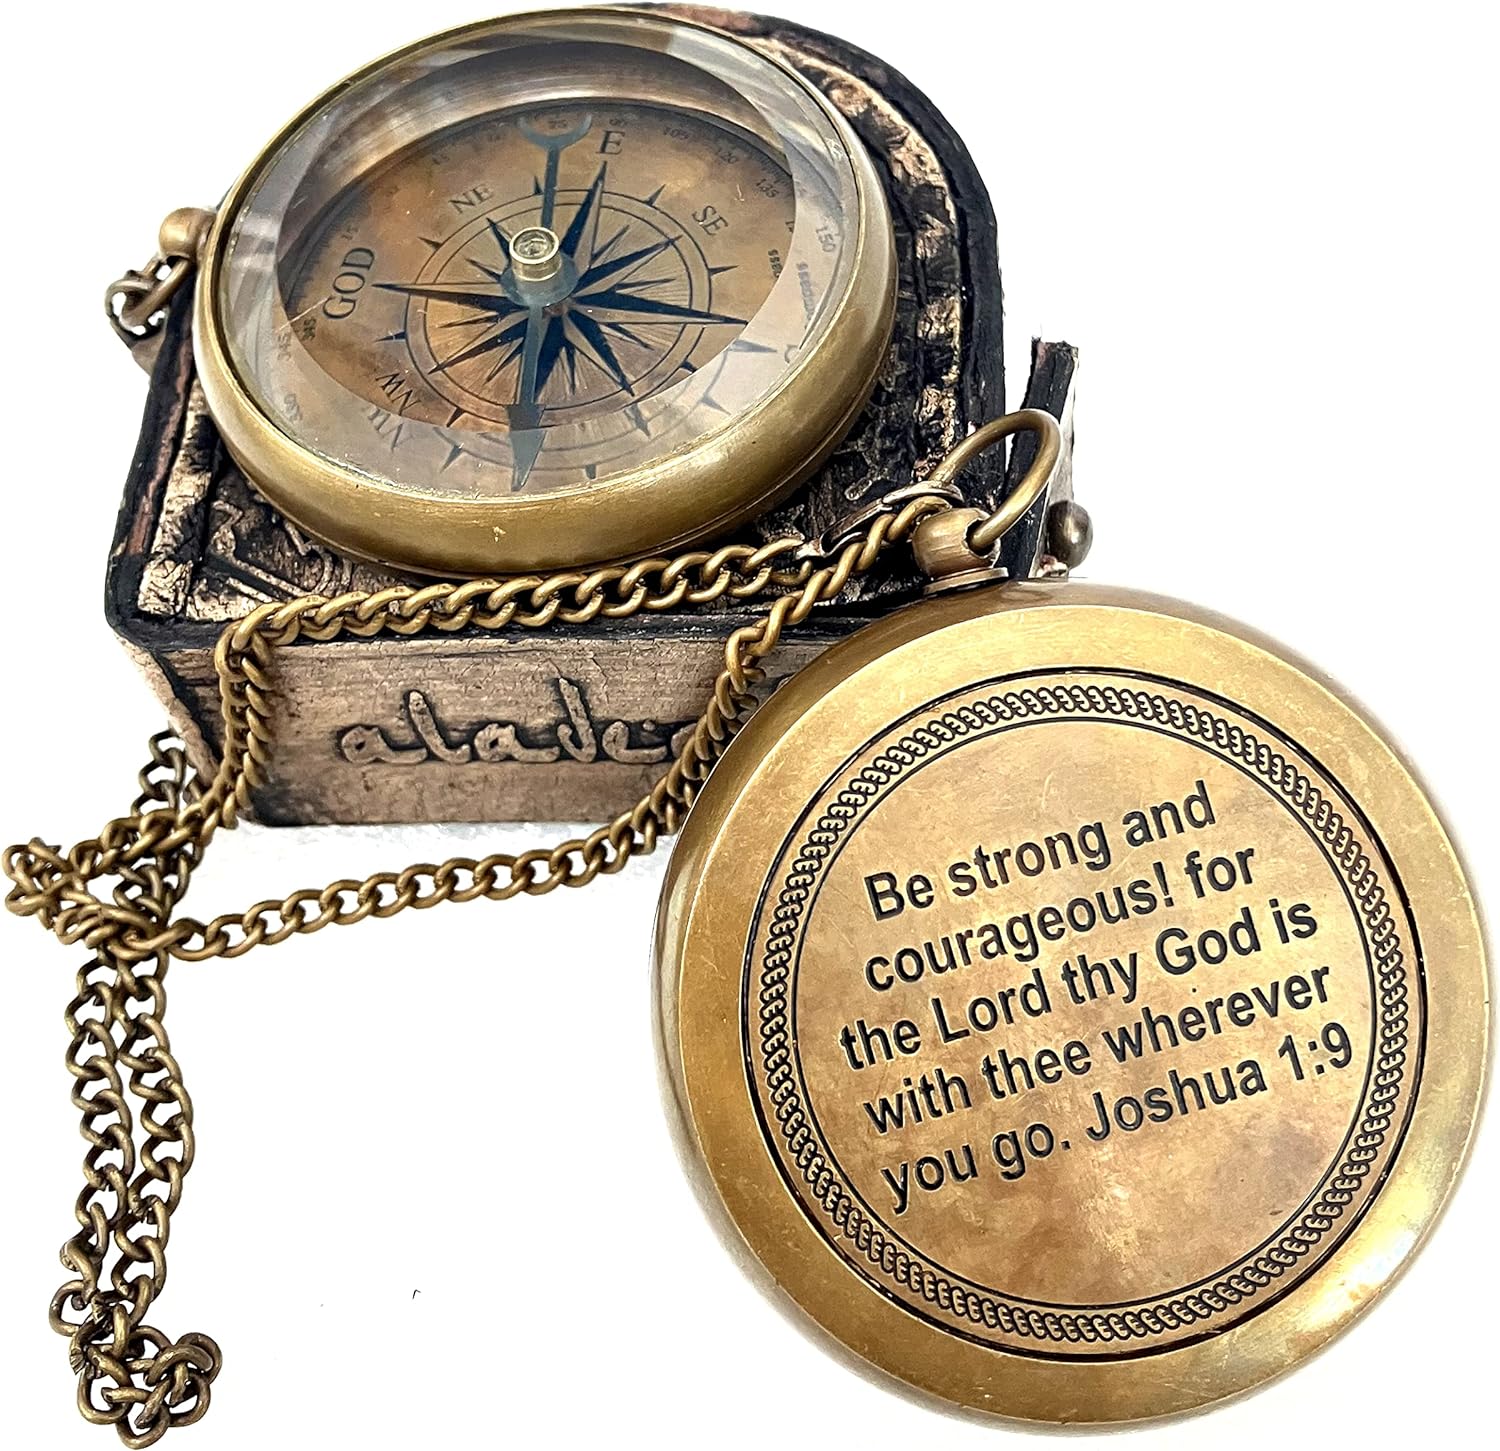 Inspirational Gift Compass - God My Lord Guide Me - Uplifting Baptism Gift, Graduation Gift, Birthday, Confirmation Gift for Men Women Boys Girls Teenage Kids